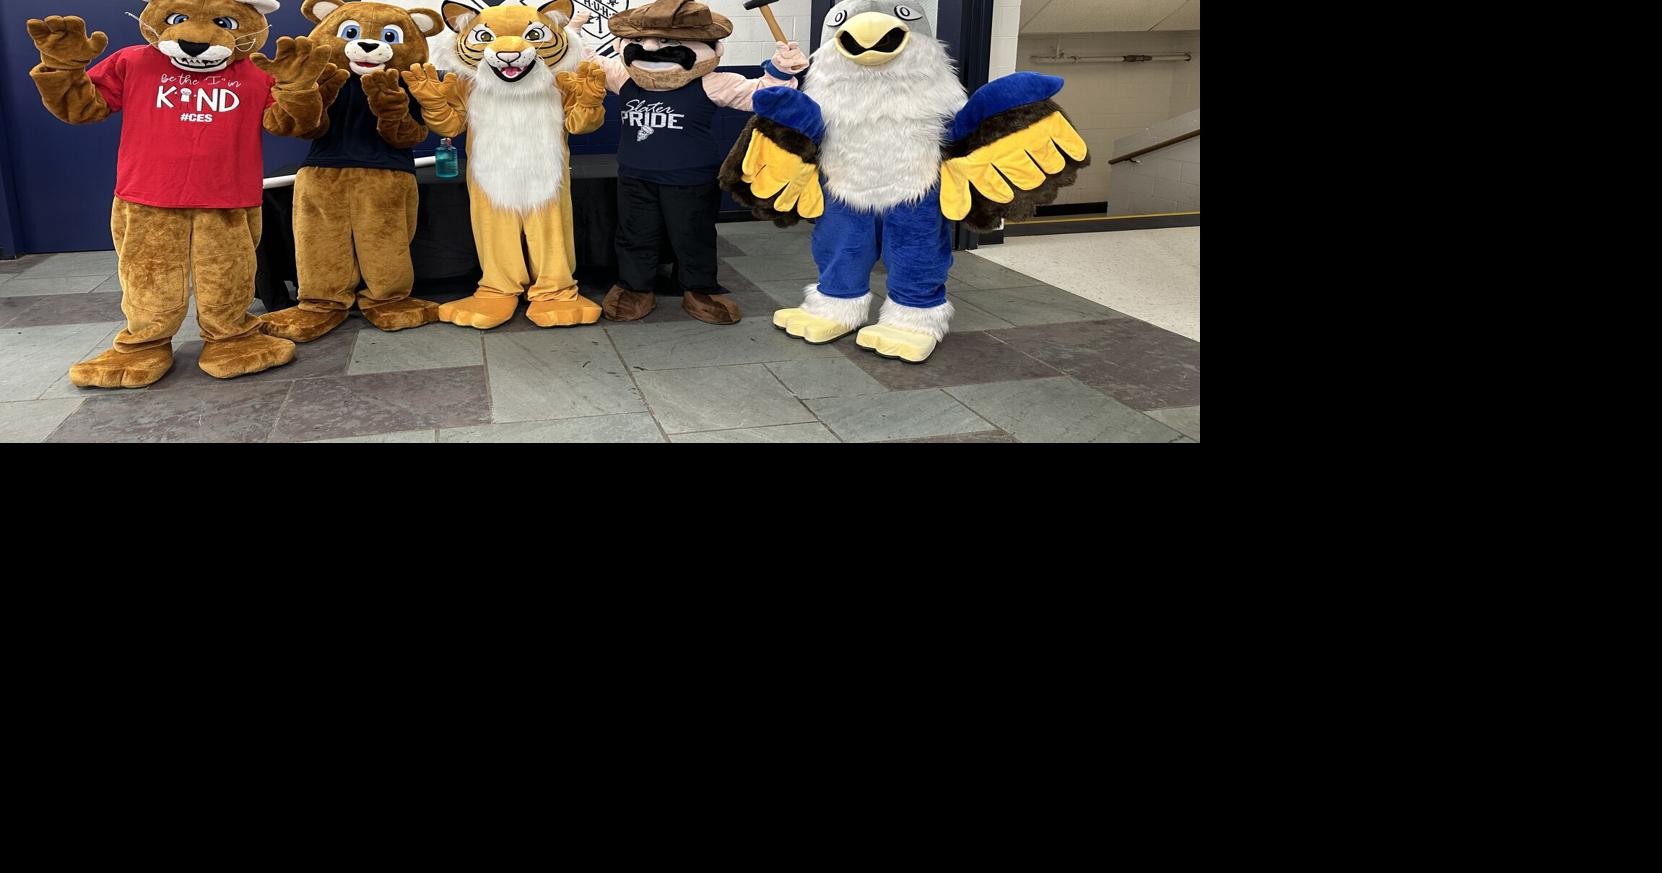 Mascots promote a healthy community